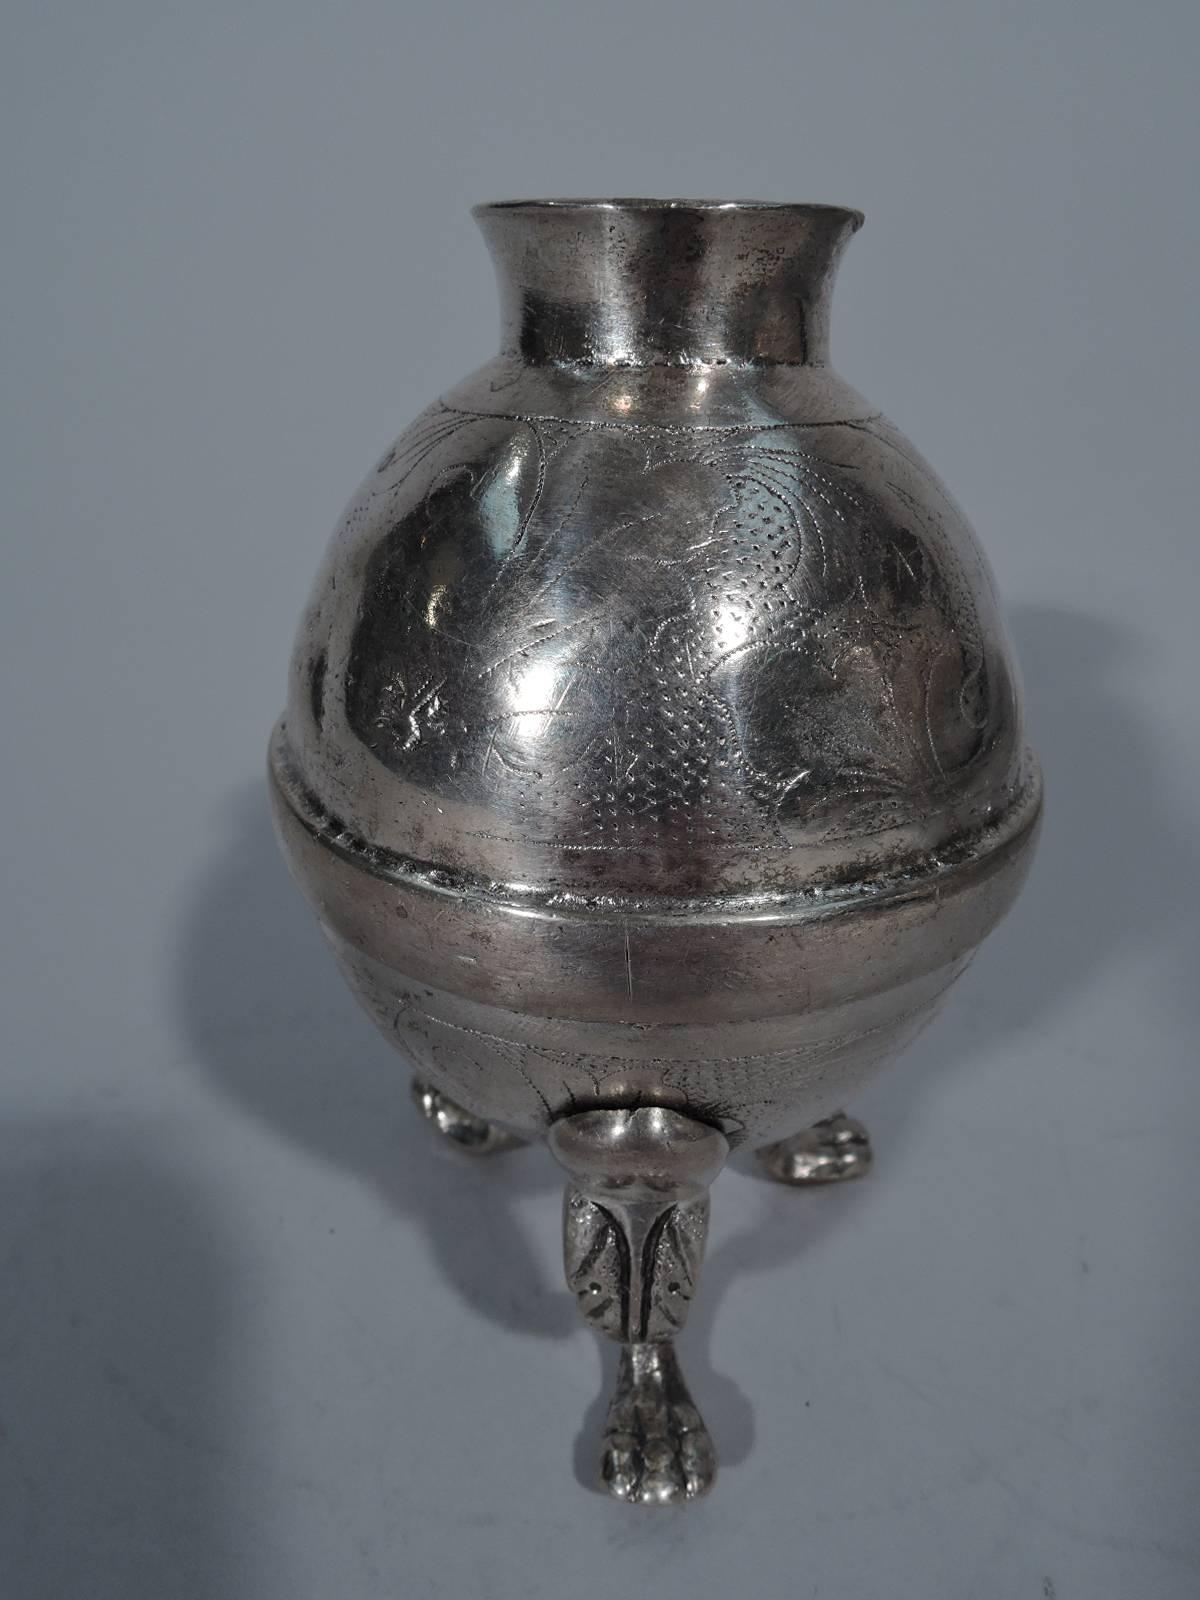 A very nice silver mate cup. Handmade in South America, circa 1850. Globular body with three scrolled supports terminating in paws. Fine quality engraved scrolls and leaves on body and supports. Thick silver gauge. Condition: Original patina with